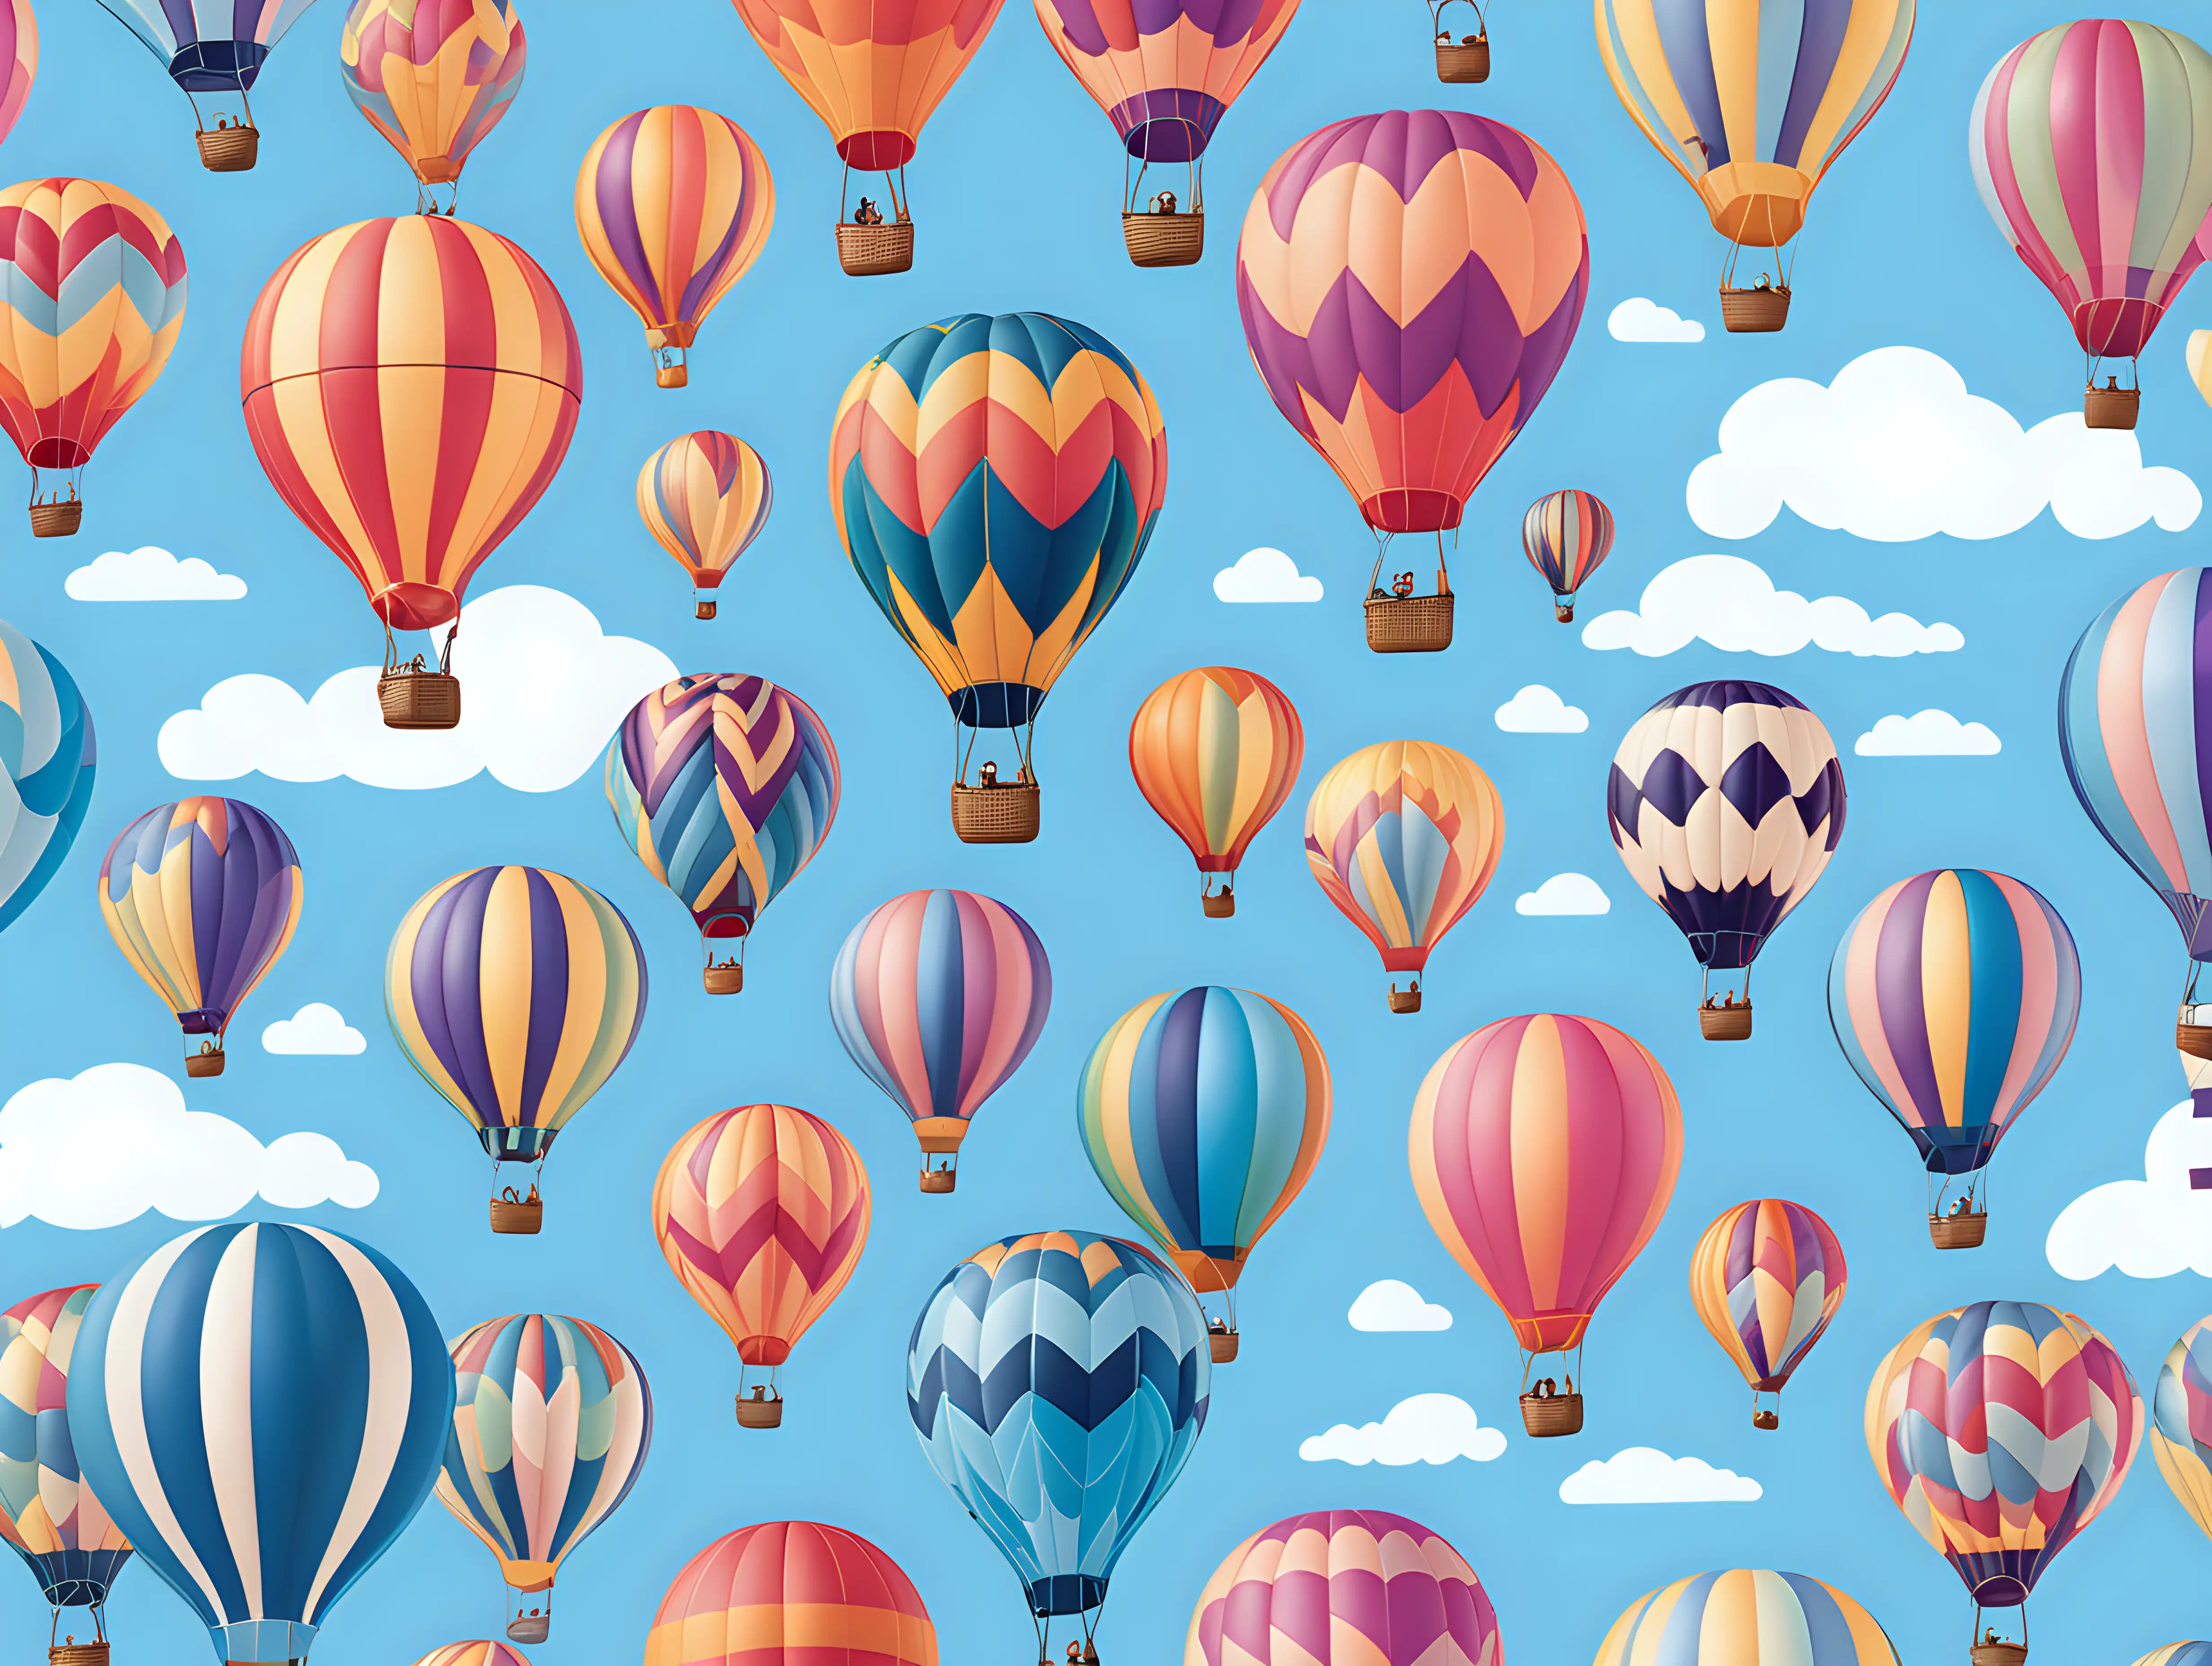 Generate an illustration of a vibrant hot air balloon festival with each balloon showcasing distinct colors and patterns against a clear blue sky. use pastel themed colors. Ensure clear lines to easily differentiate and assemble the pieces.